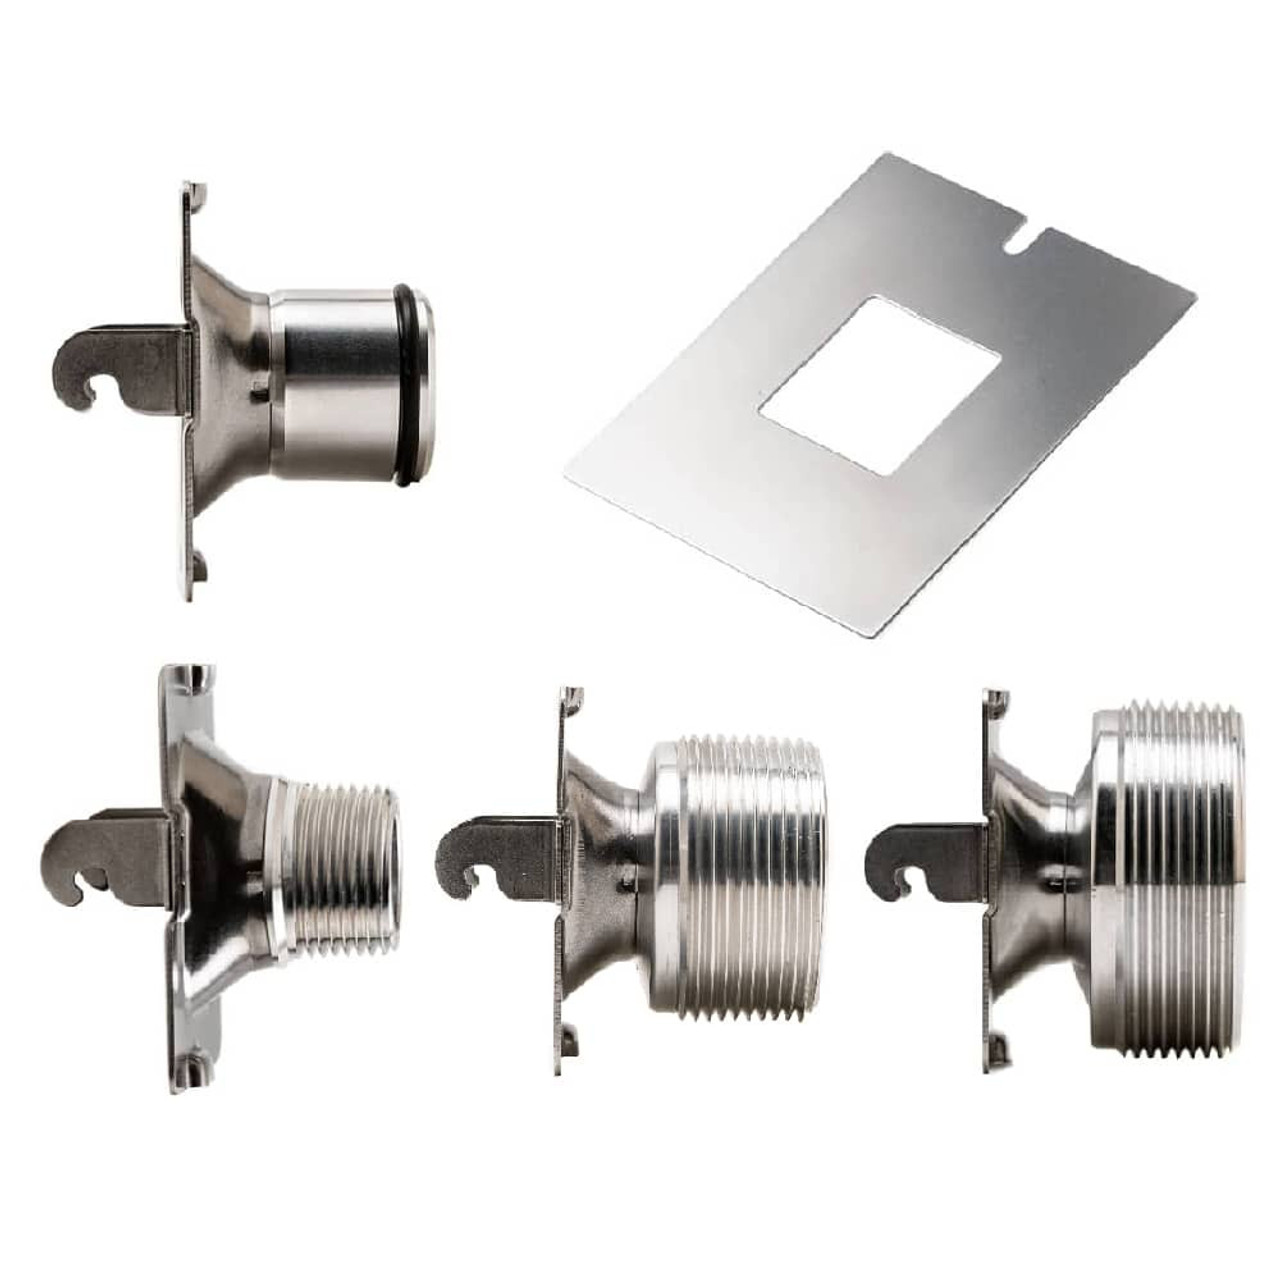 Stainless Steel Drum - Fittings & Accessories - Con-Tech